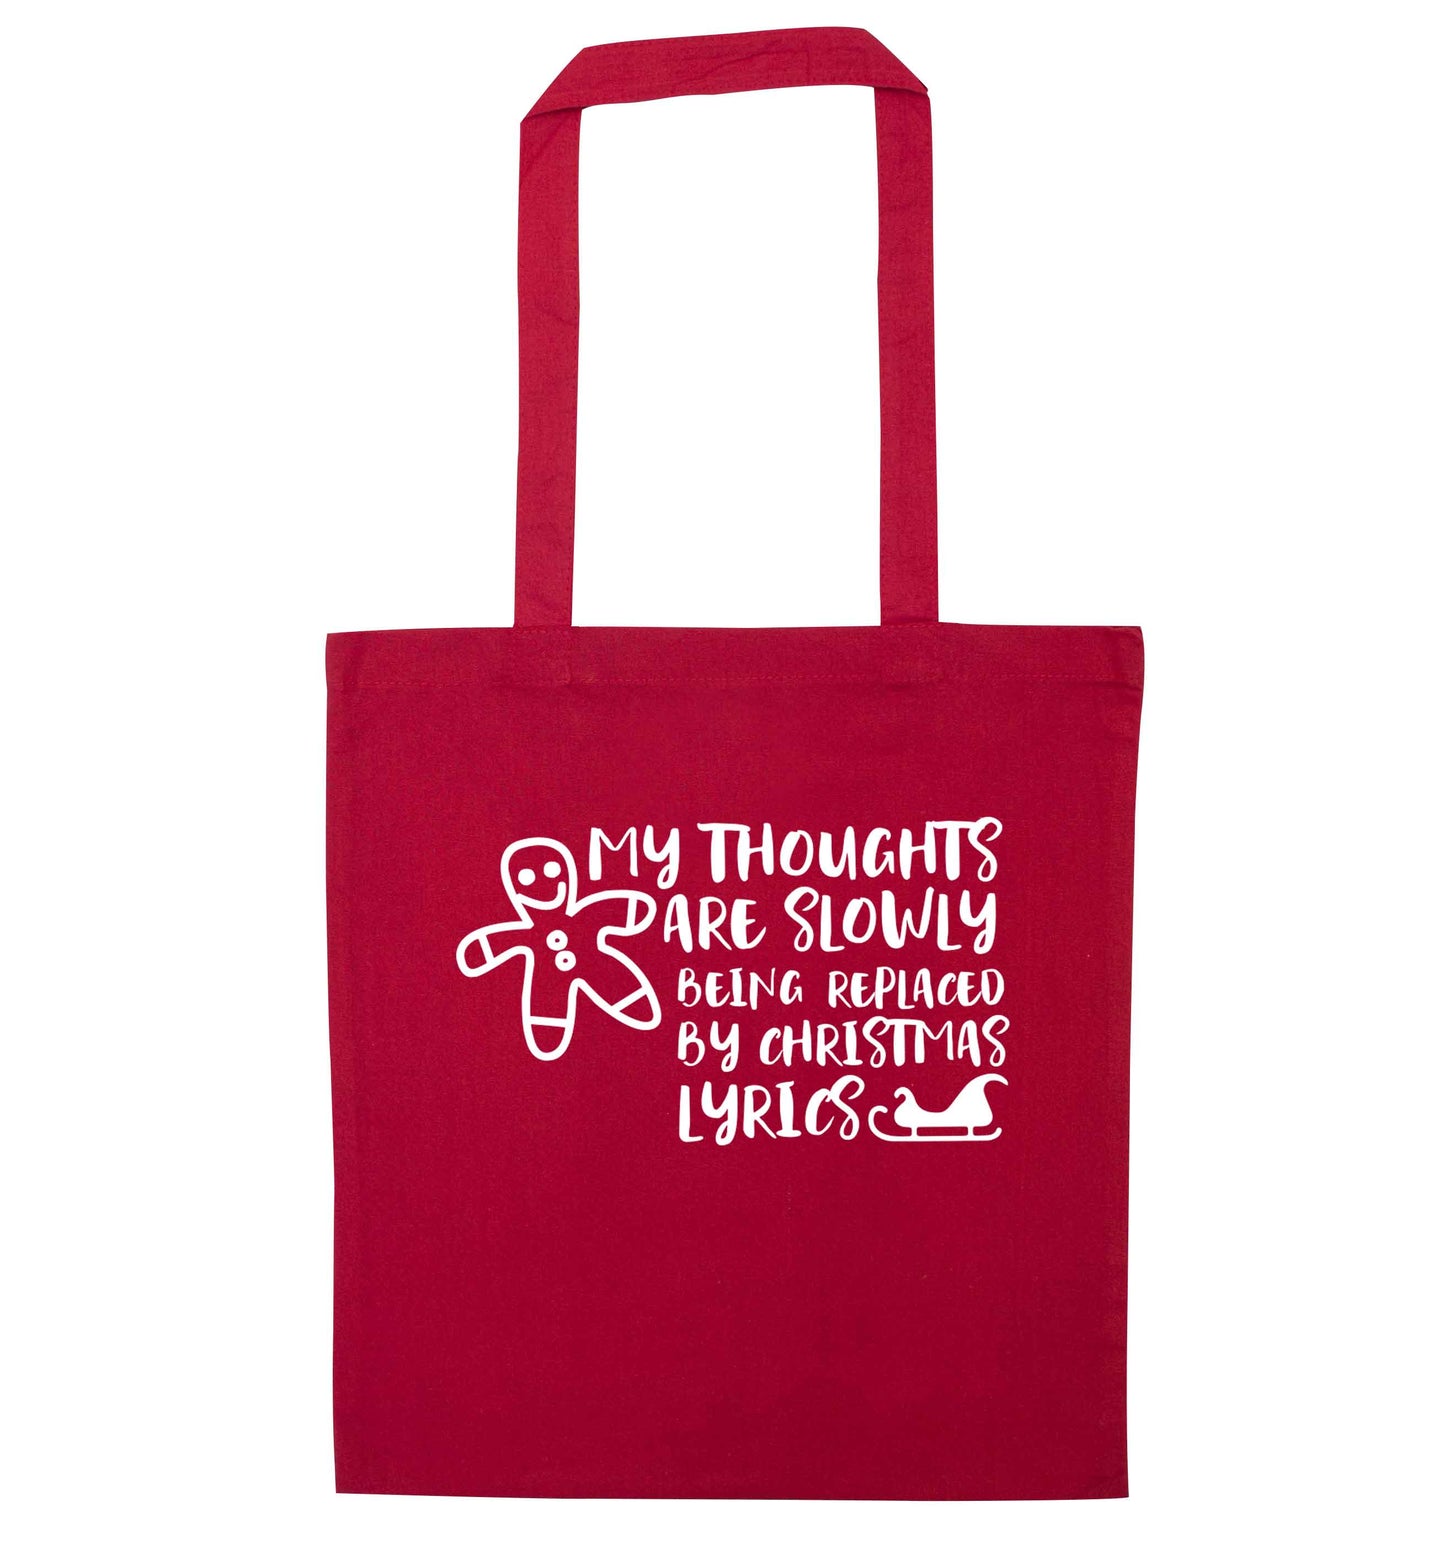 My thoughts are slowly being replaced by Christmas lyrics red tote bag